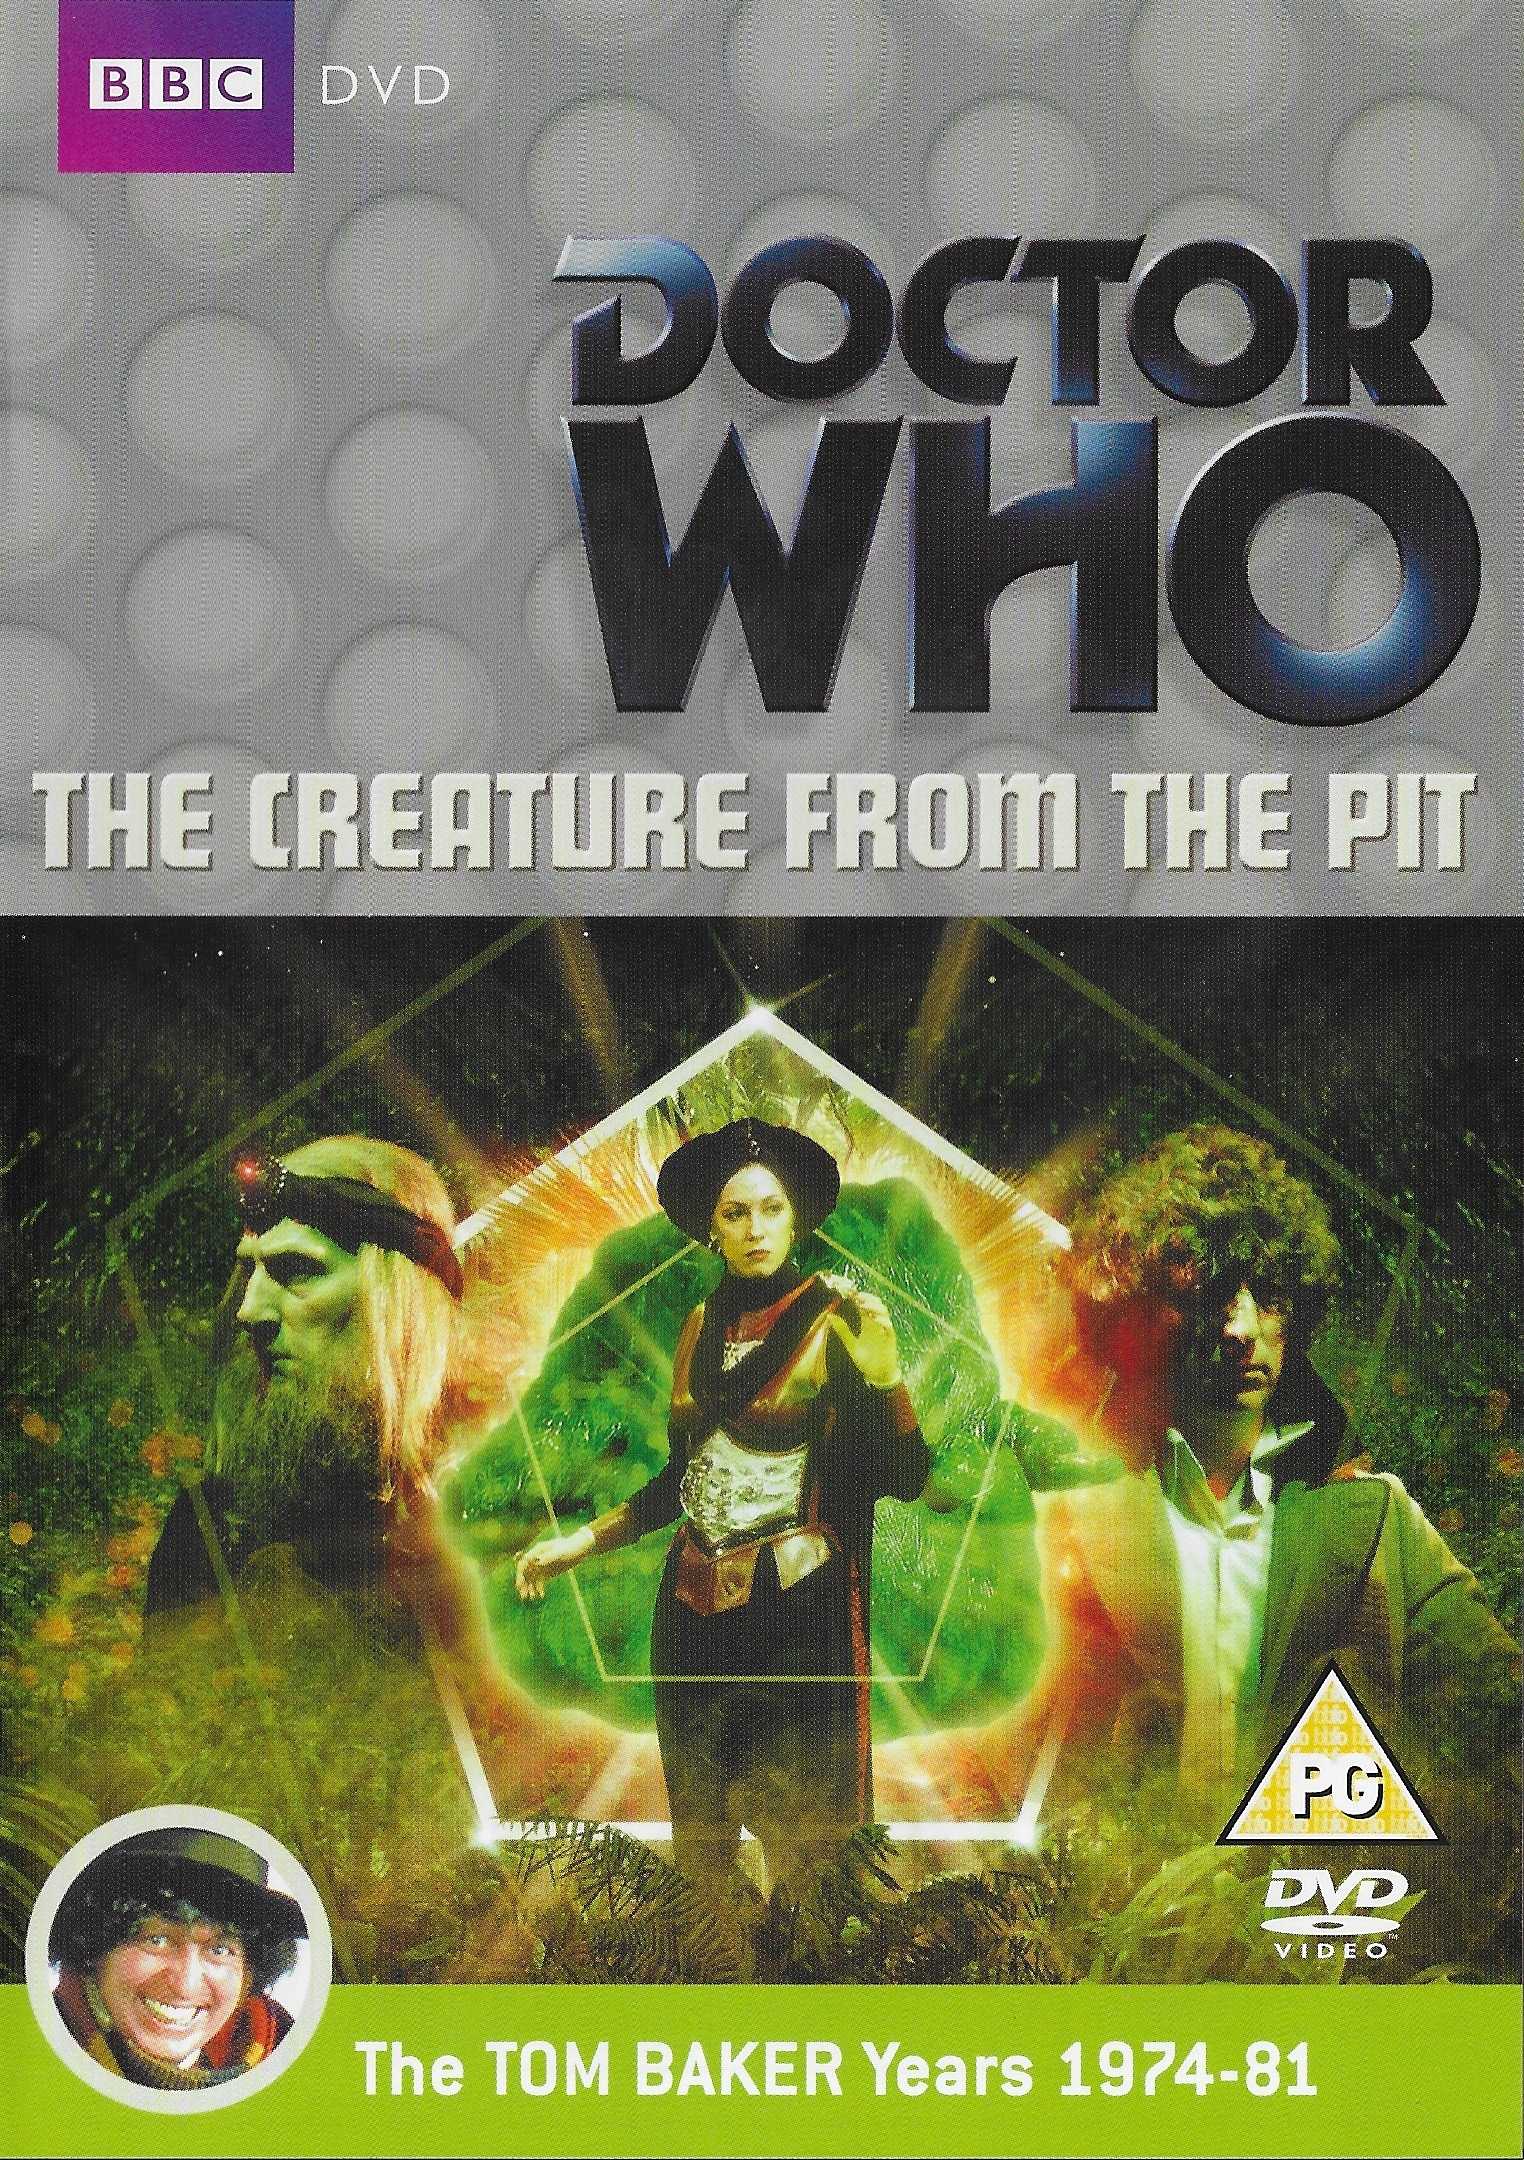 Picture of BBCDVD 2849 Doctor Who - The creature from the pit by artist David Fisher from the BBC dvds - Records and Tapes library